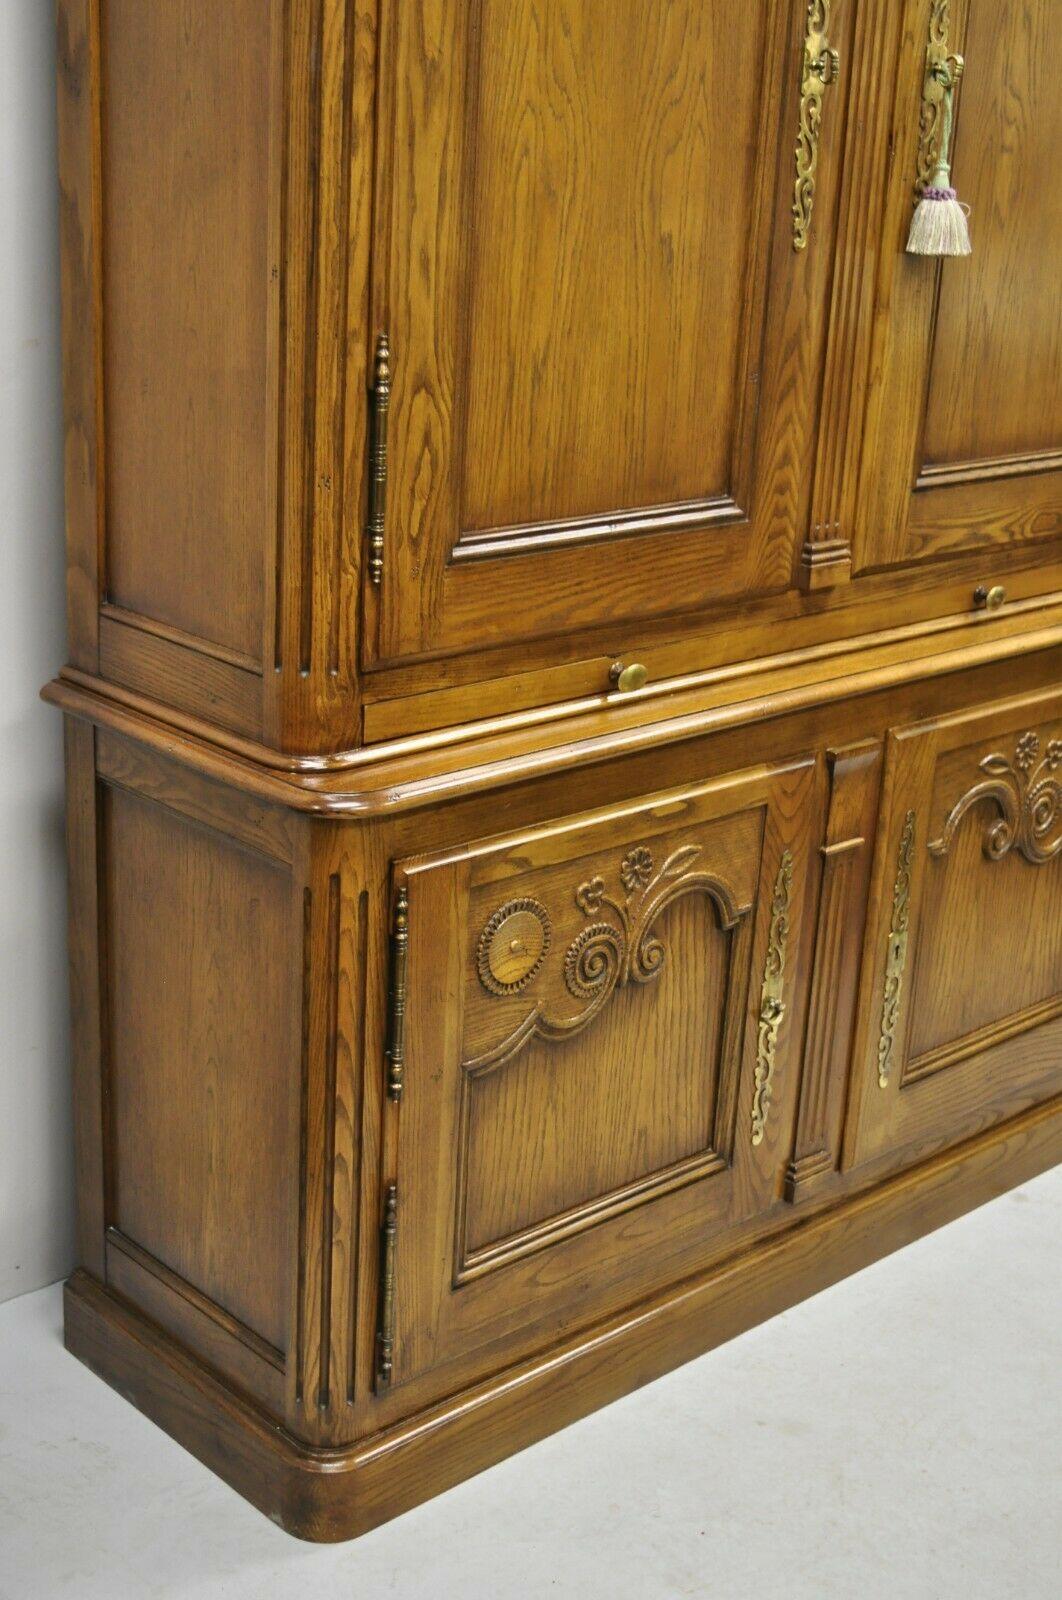 Baker Country French Provincial Oak Wood Lighted Bar Cabinet Display Buffet 2